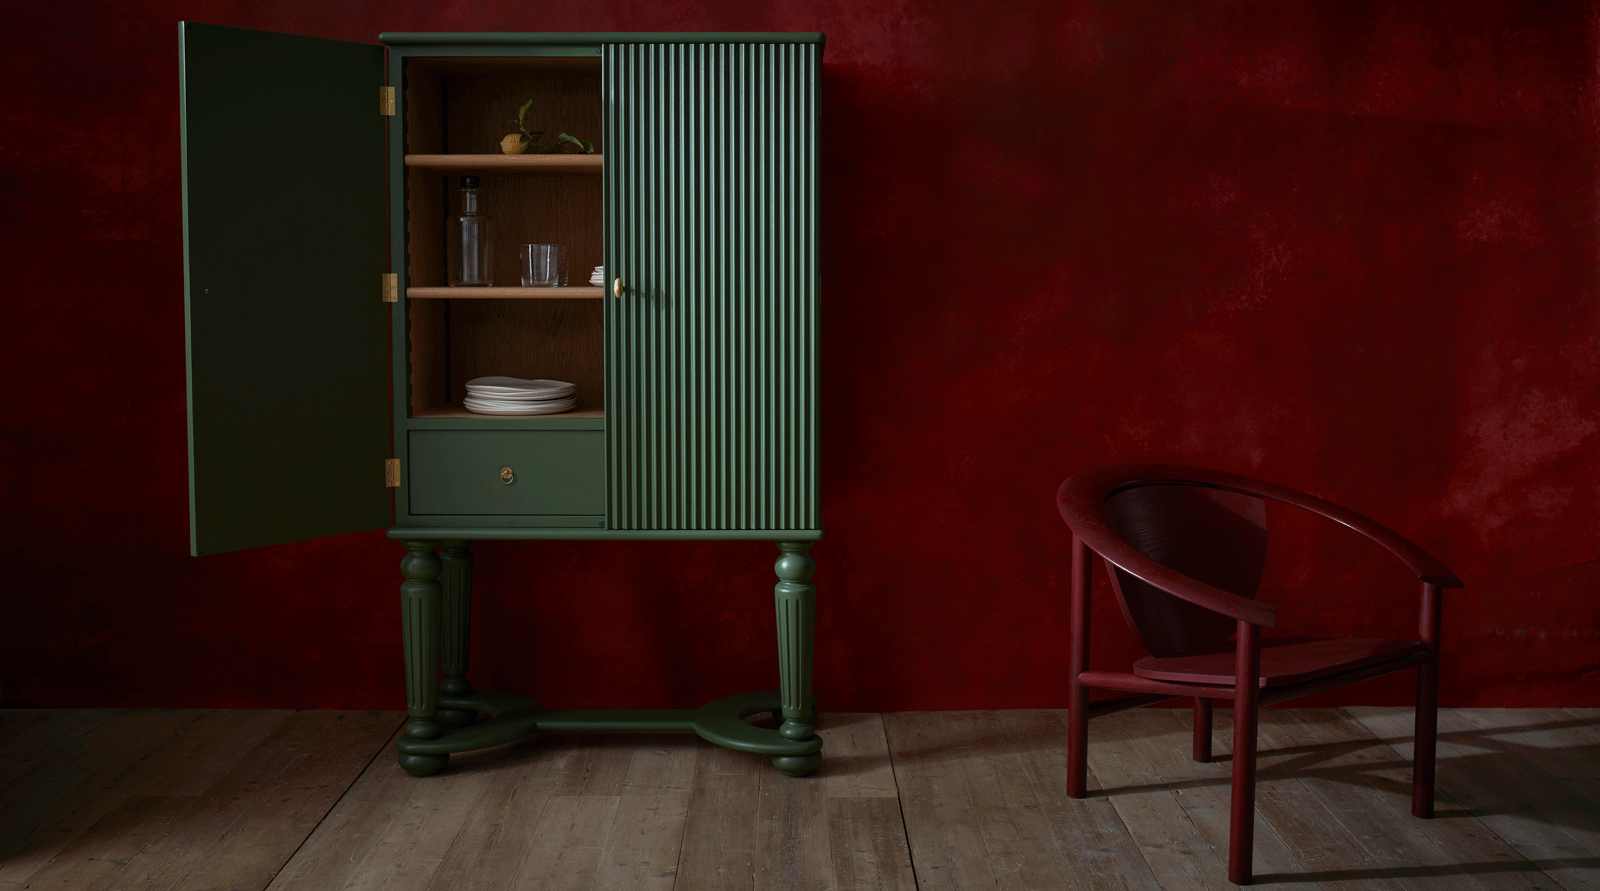 Dark green cabinet and red chair against a red wall